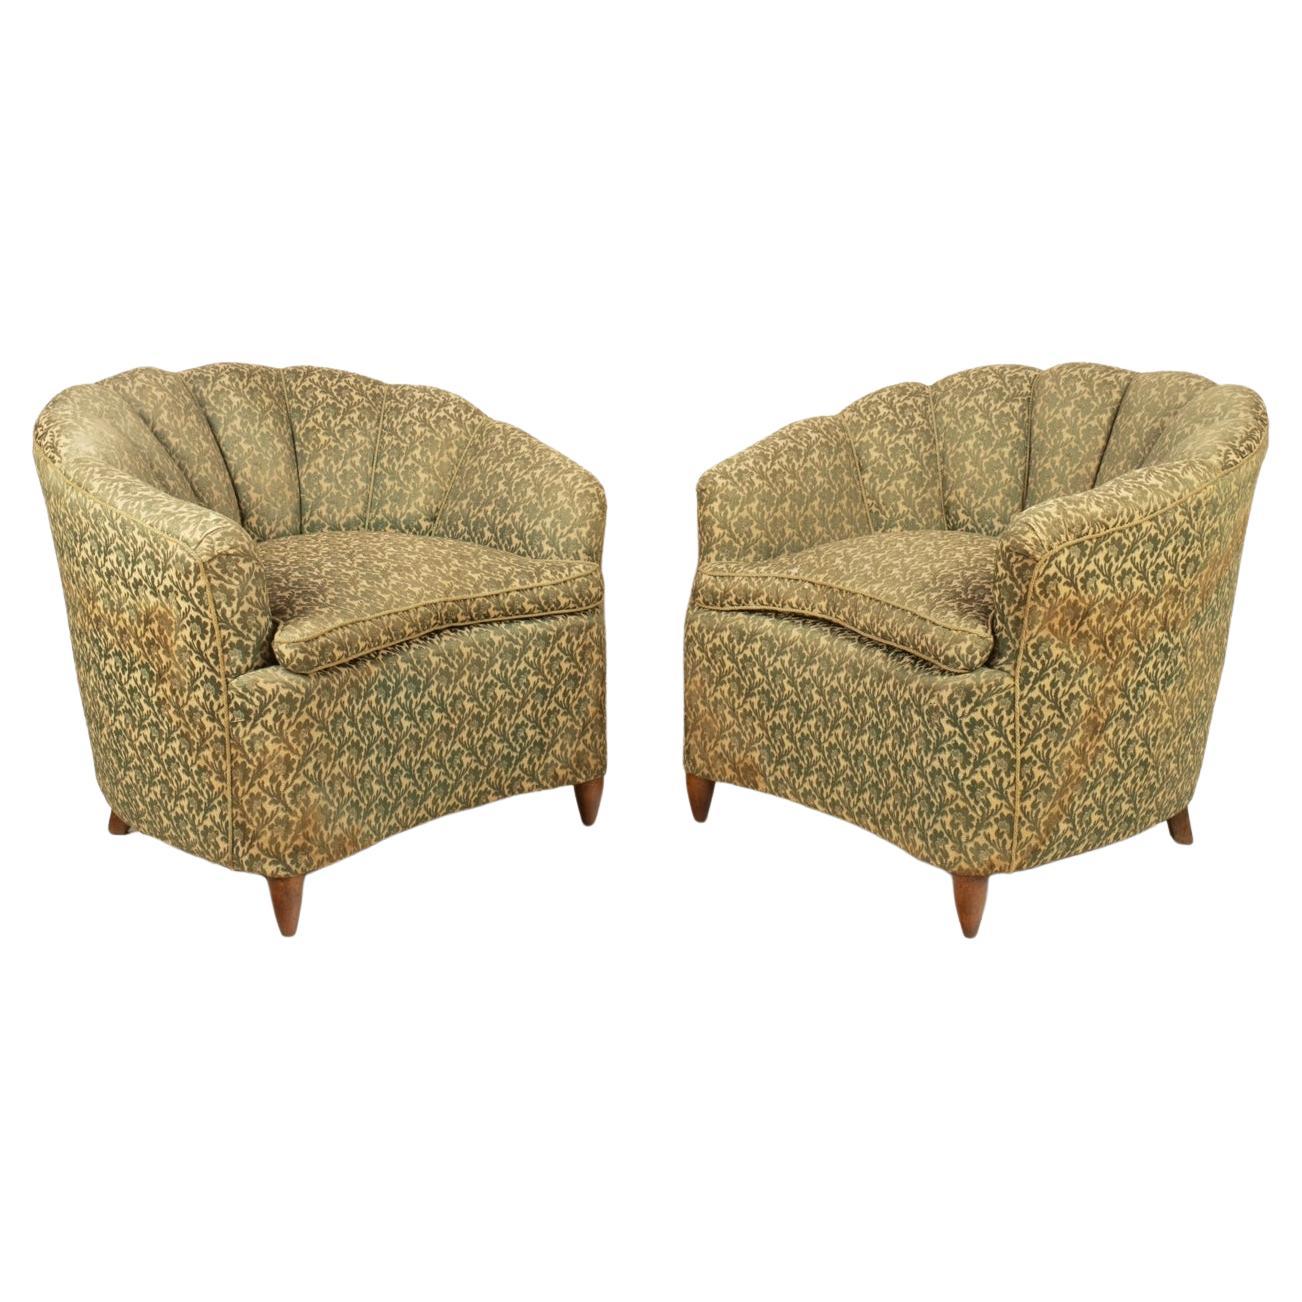 Pair of Giò Ponti Style Shell Armchairs for Home & Garden